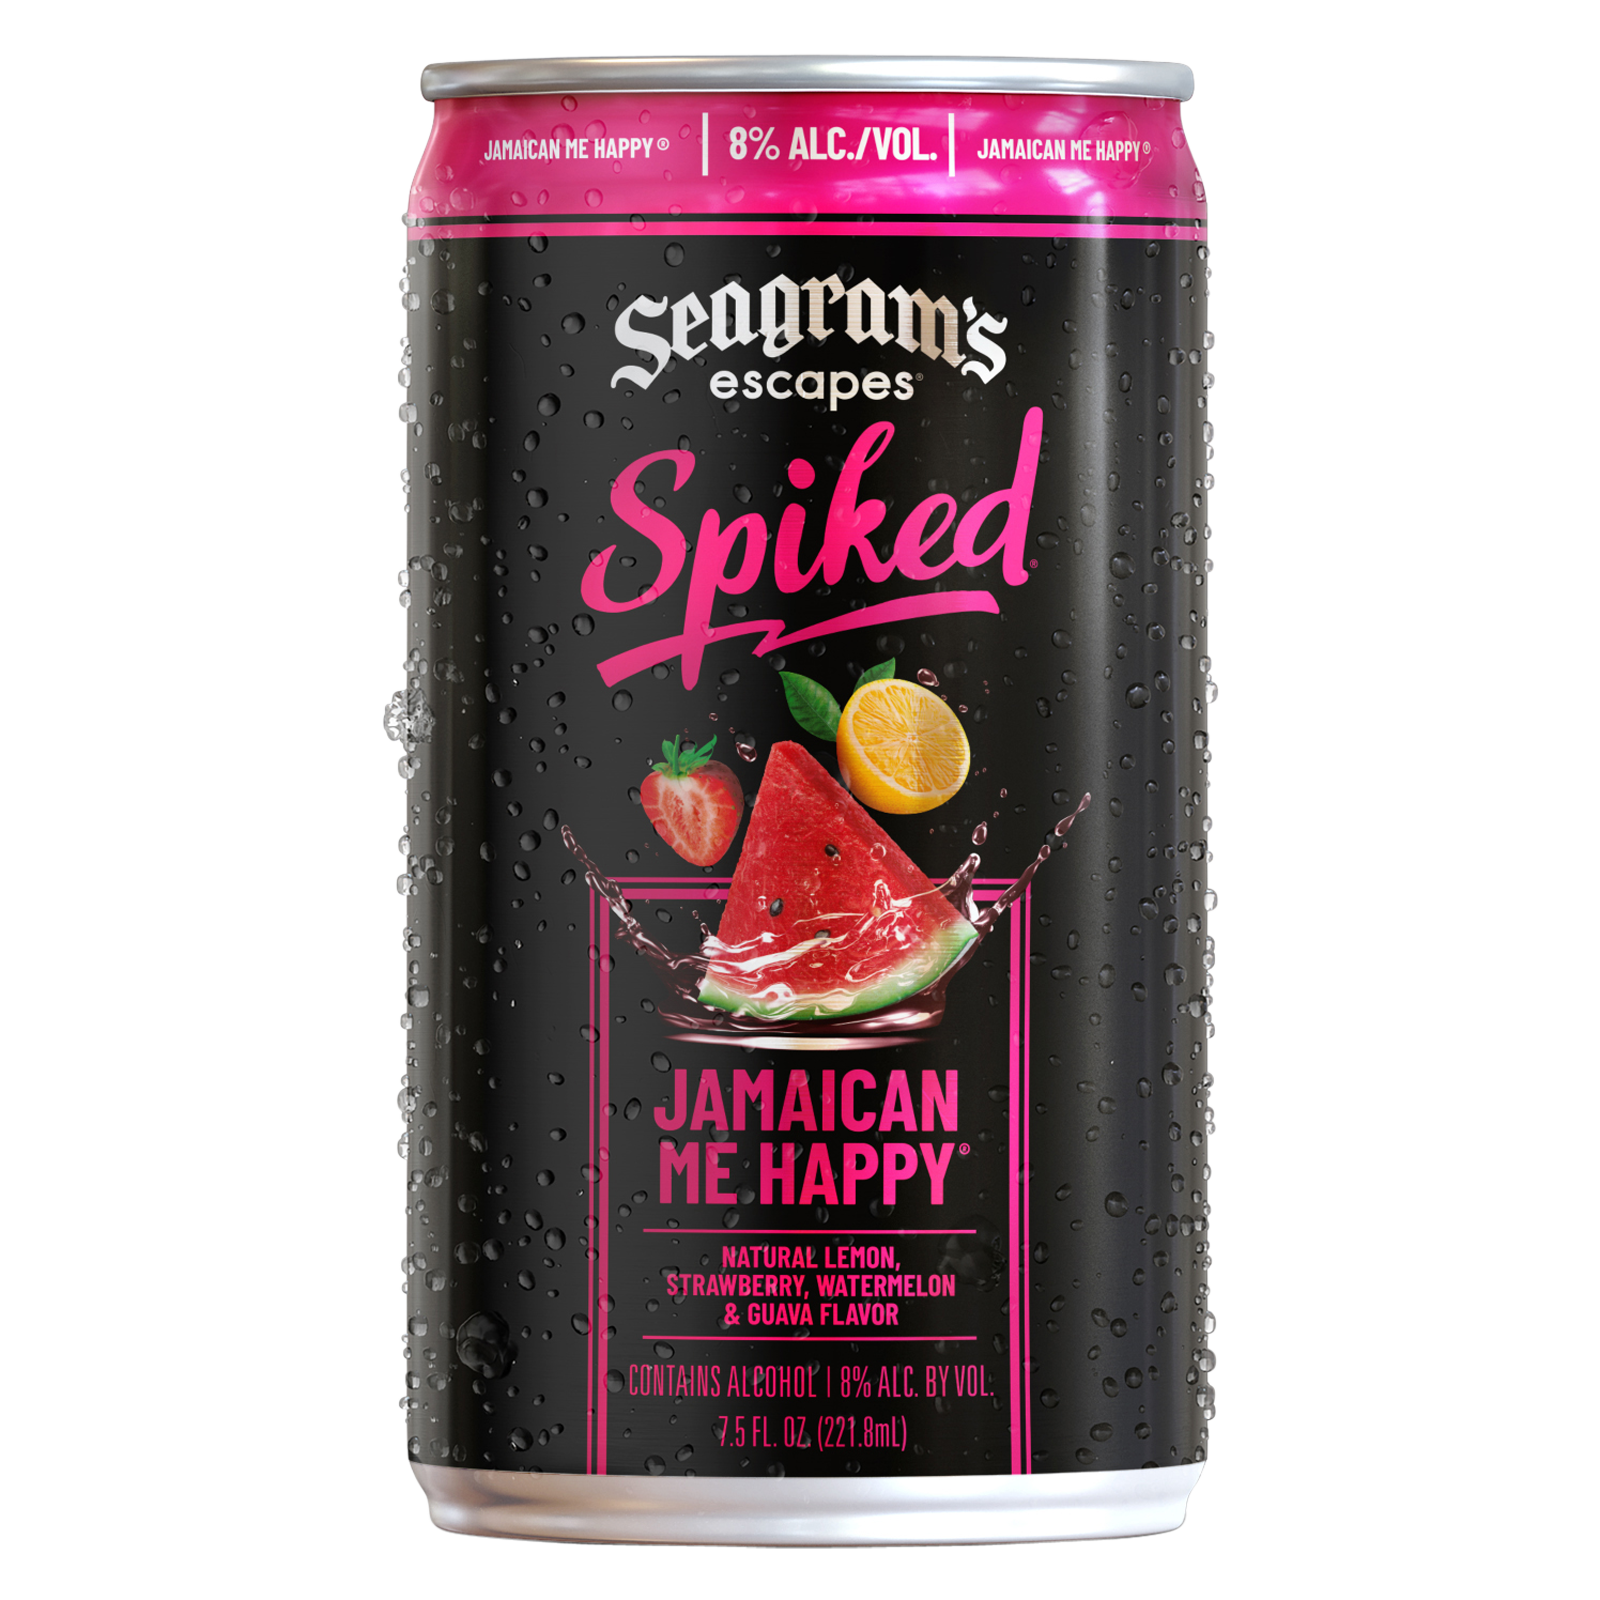 Seagram's Escapes Spiked Jamaican Me Happy Single 7.5oz Can 8% ABV